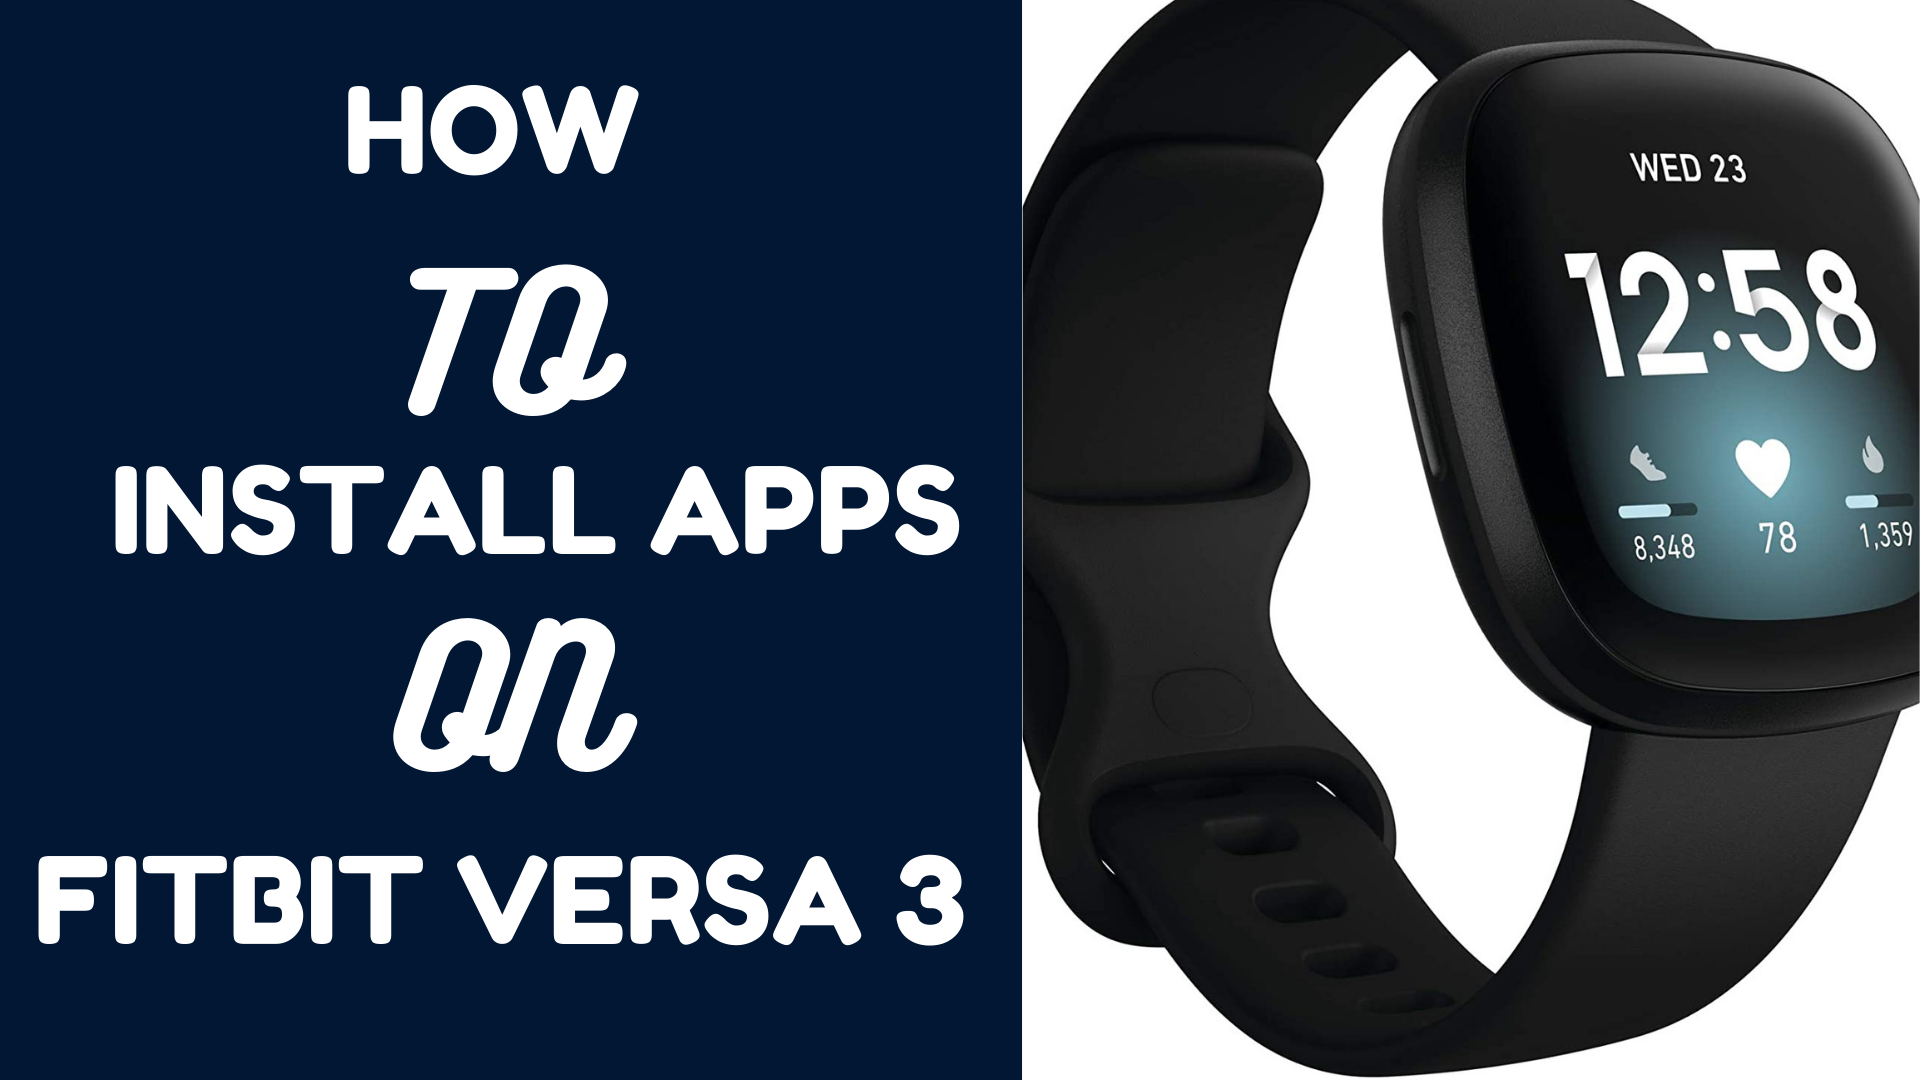 How to Install and Delete Apps on Fitbit Versa 3